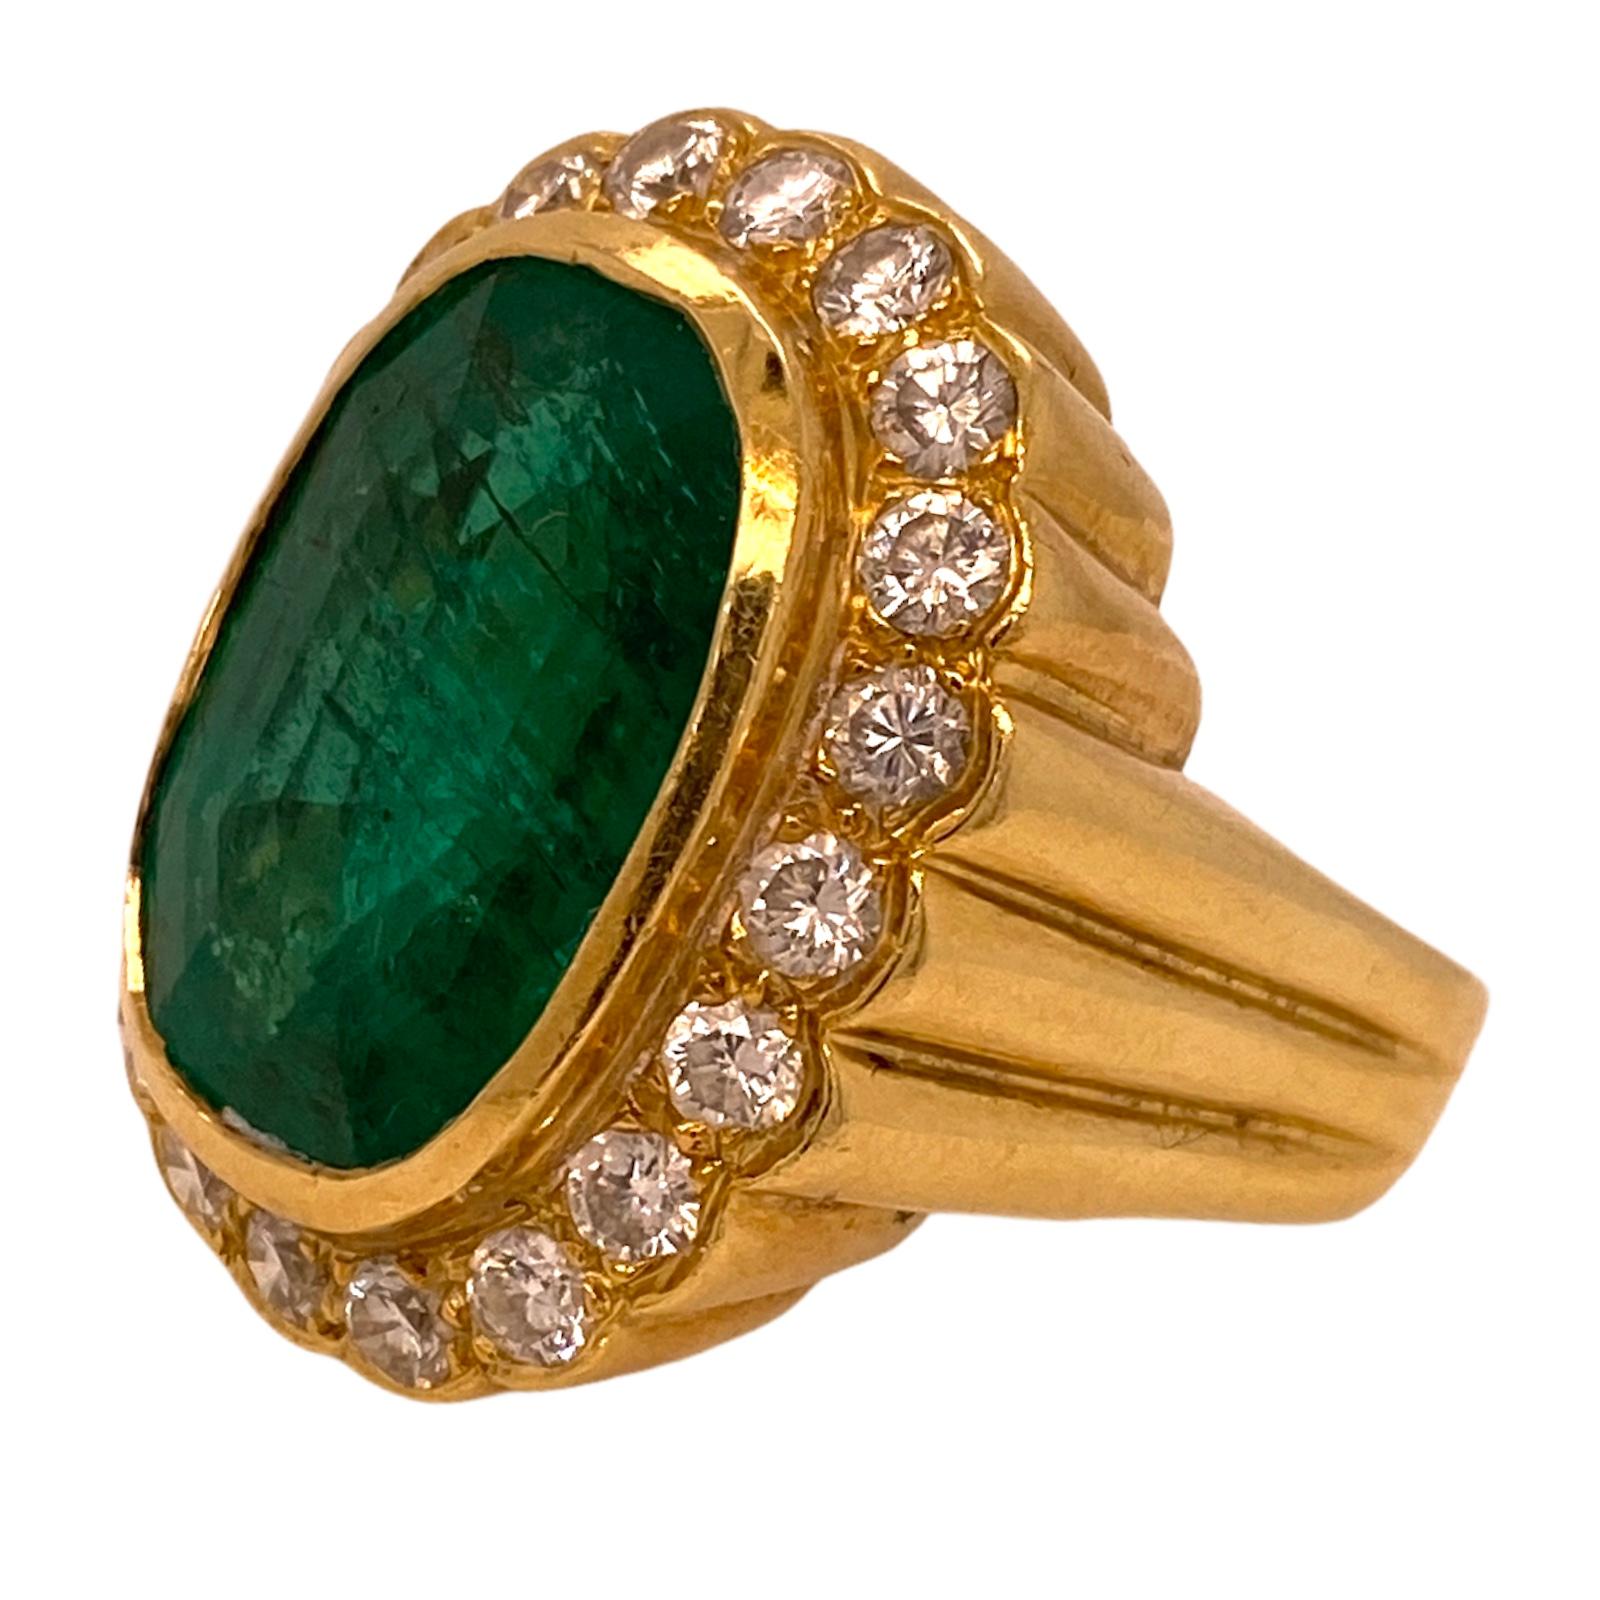 Oval Cut Colombian Emerald Diamond 18 Karat Yellow Gold Cocktail Ring AGL Certified